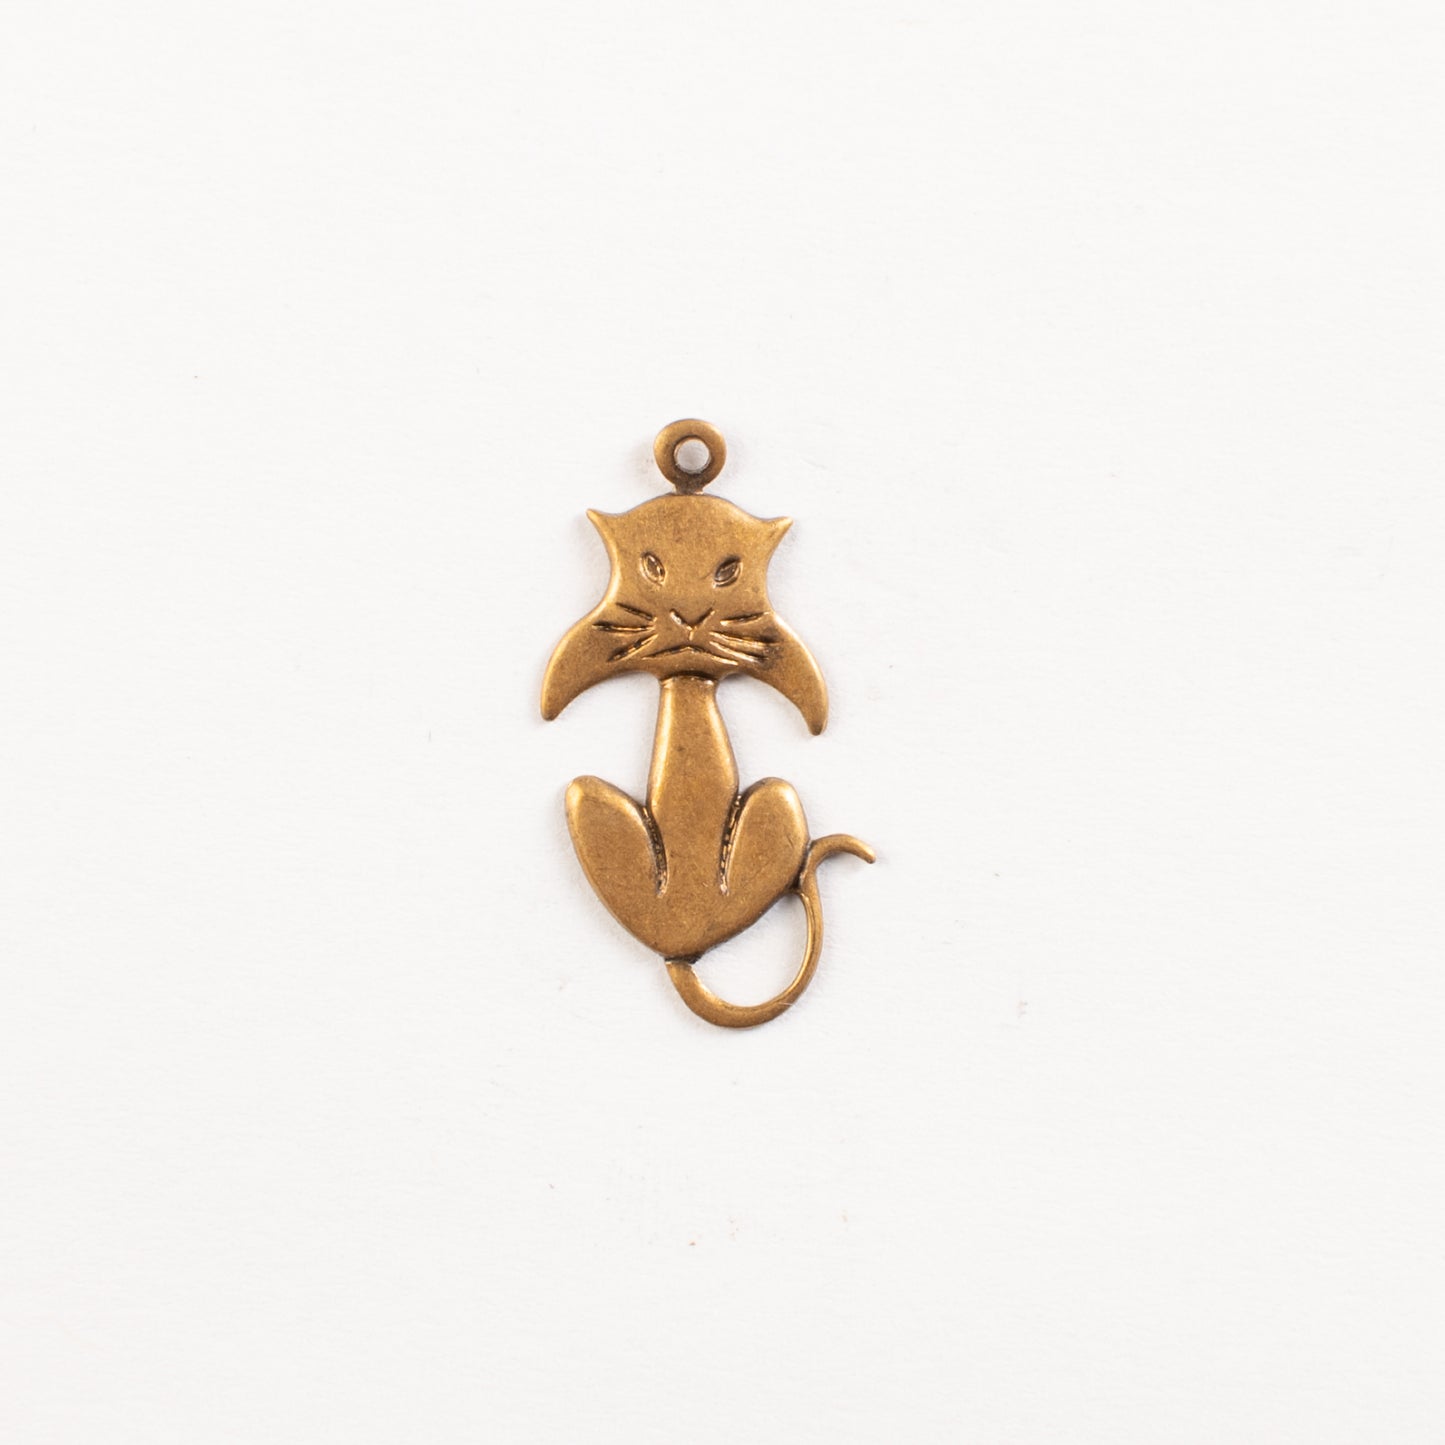 26mm Antique Gold Sitting Cat Charm, pack of 6